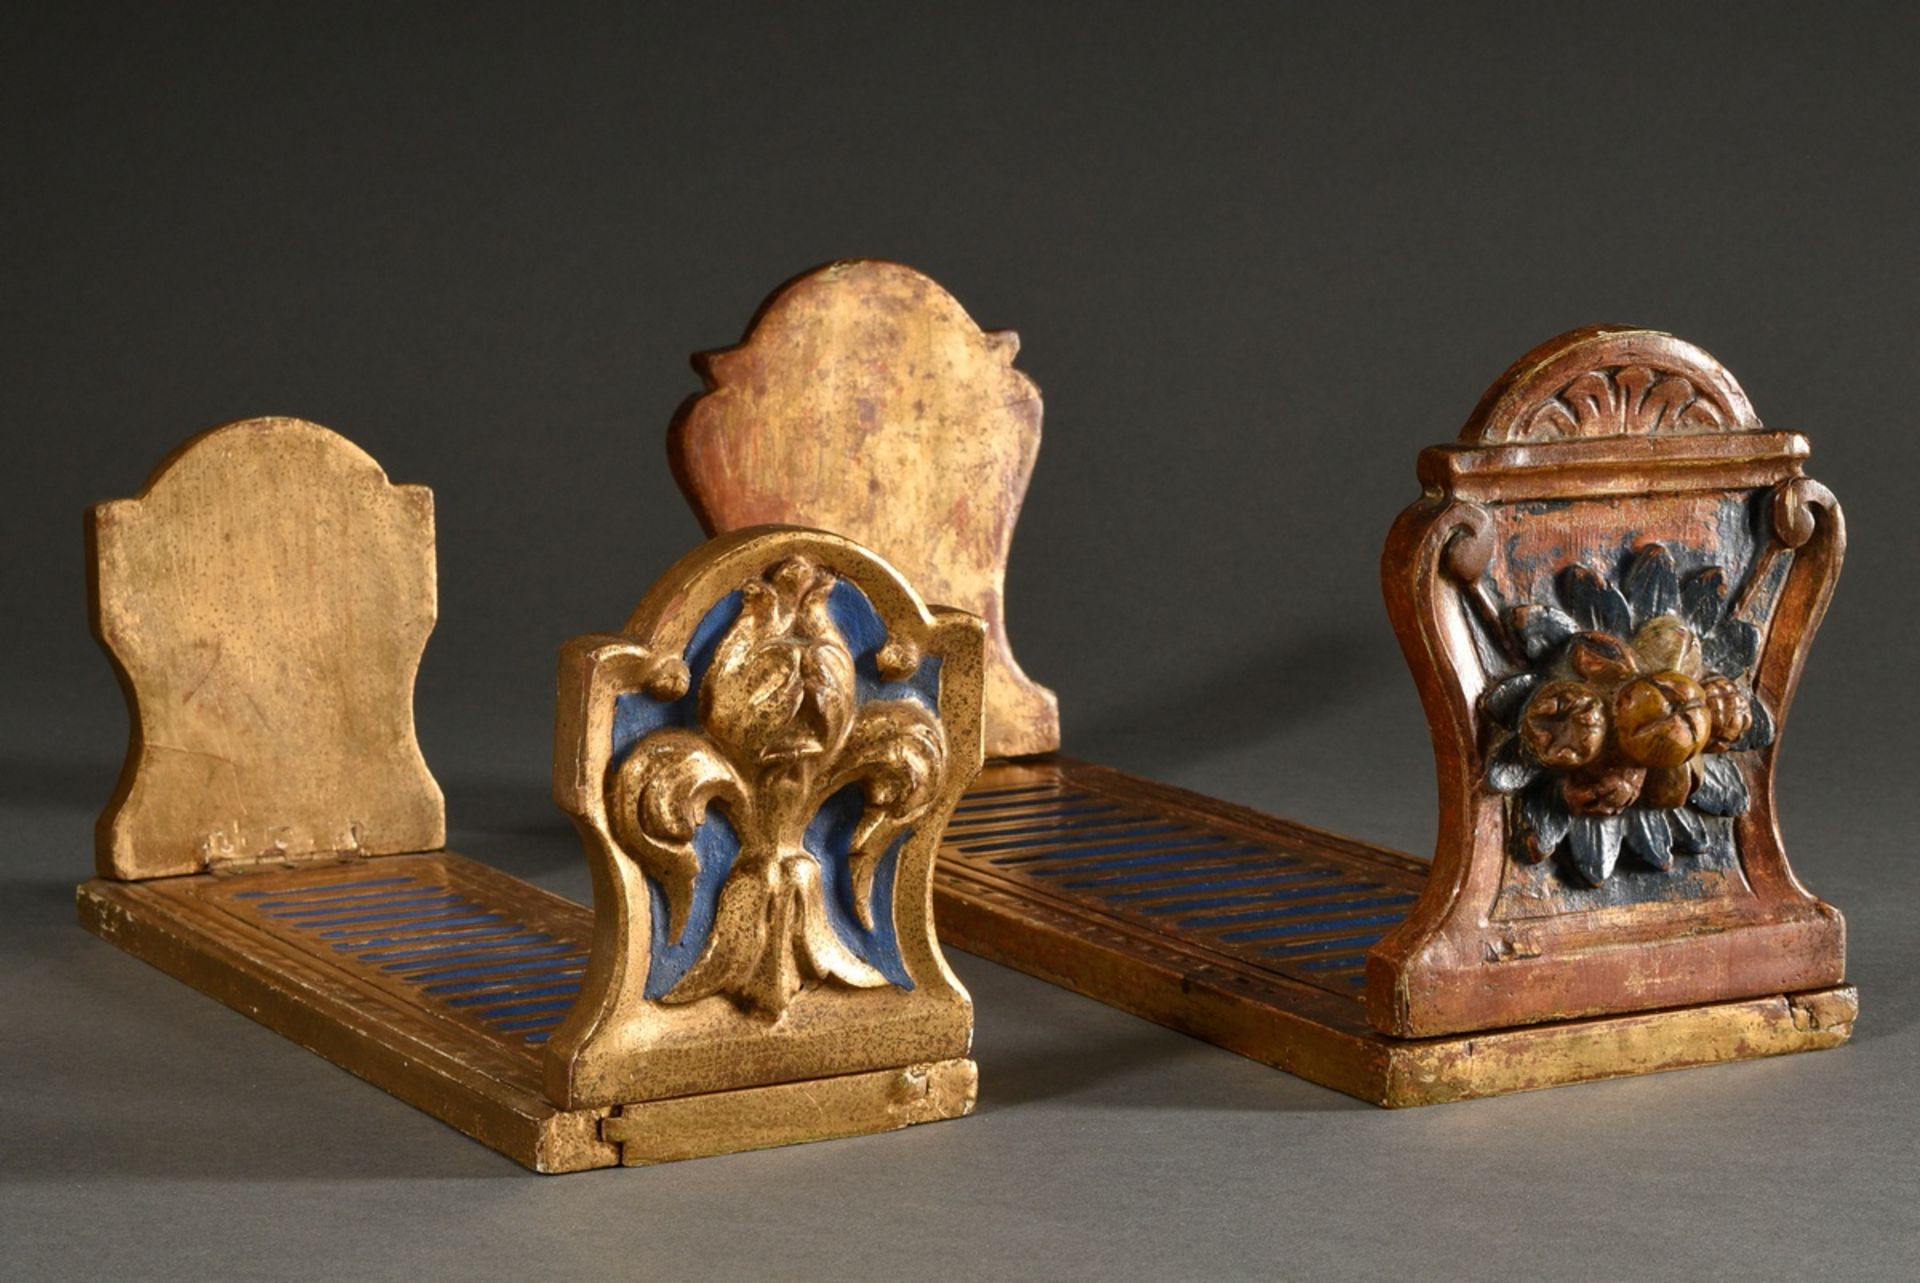 2 various size-adjustable bookends, carved wood, coloured and gilded, Italy early 20th century, 41.